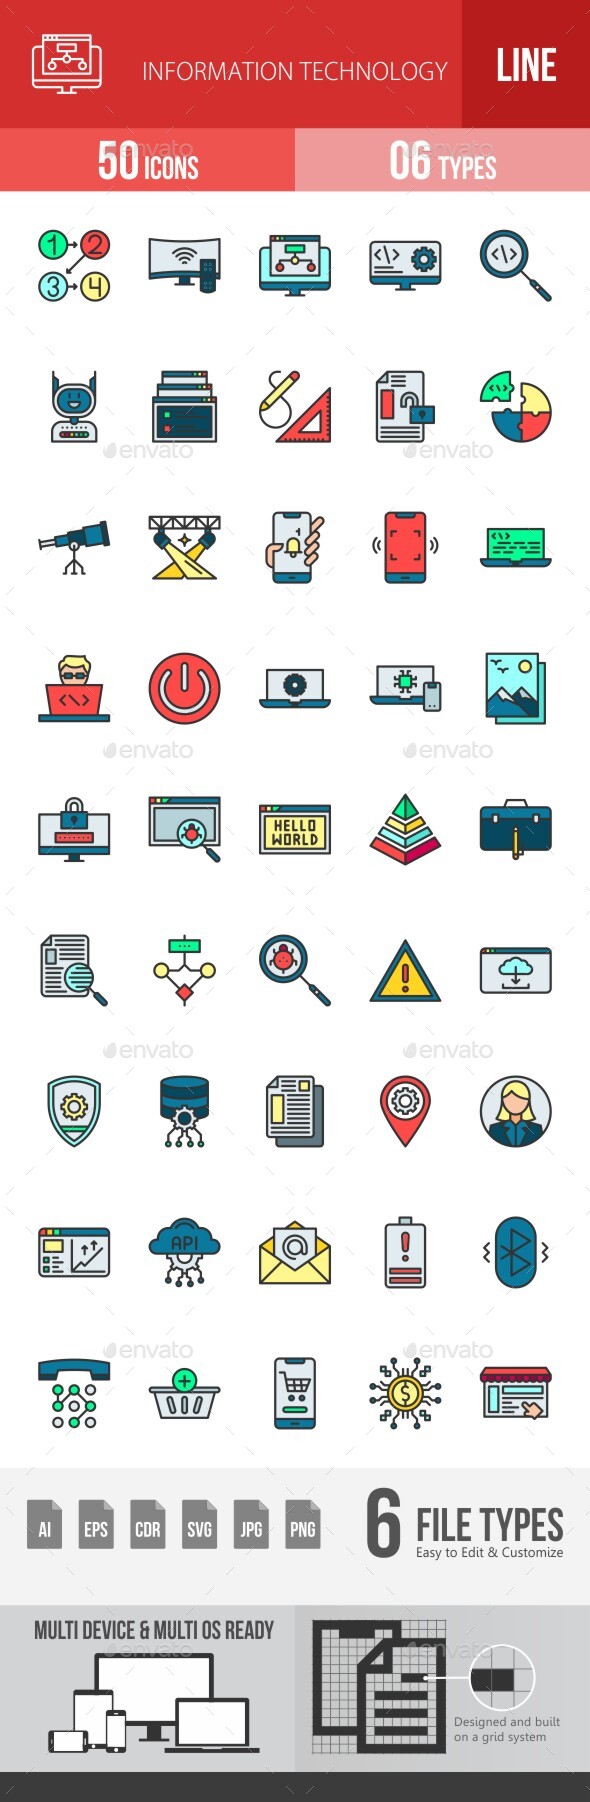 [DOWNLOAD]Information Technology Filled Line Icons